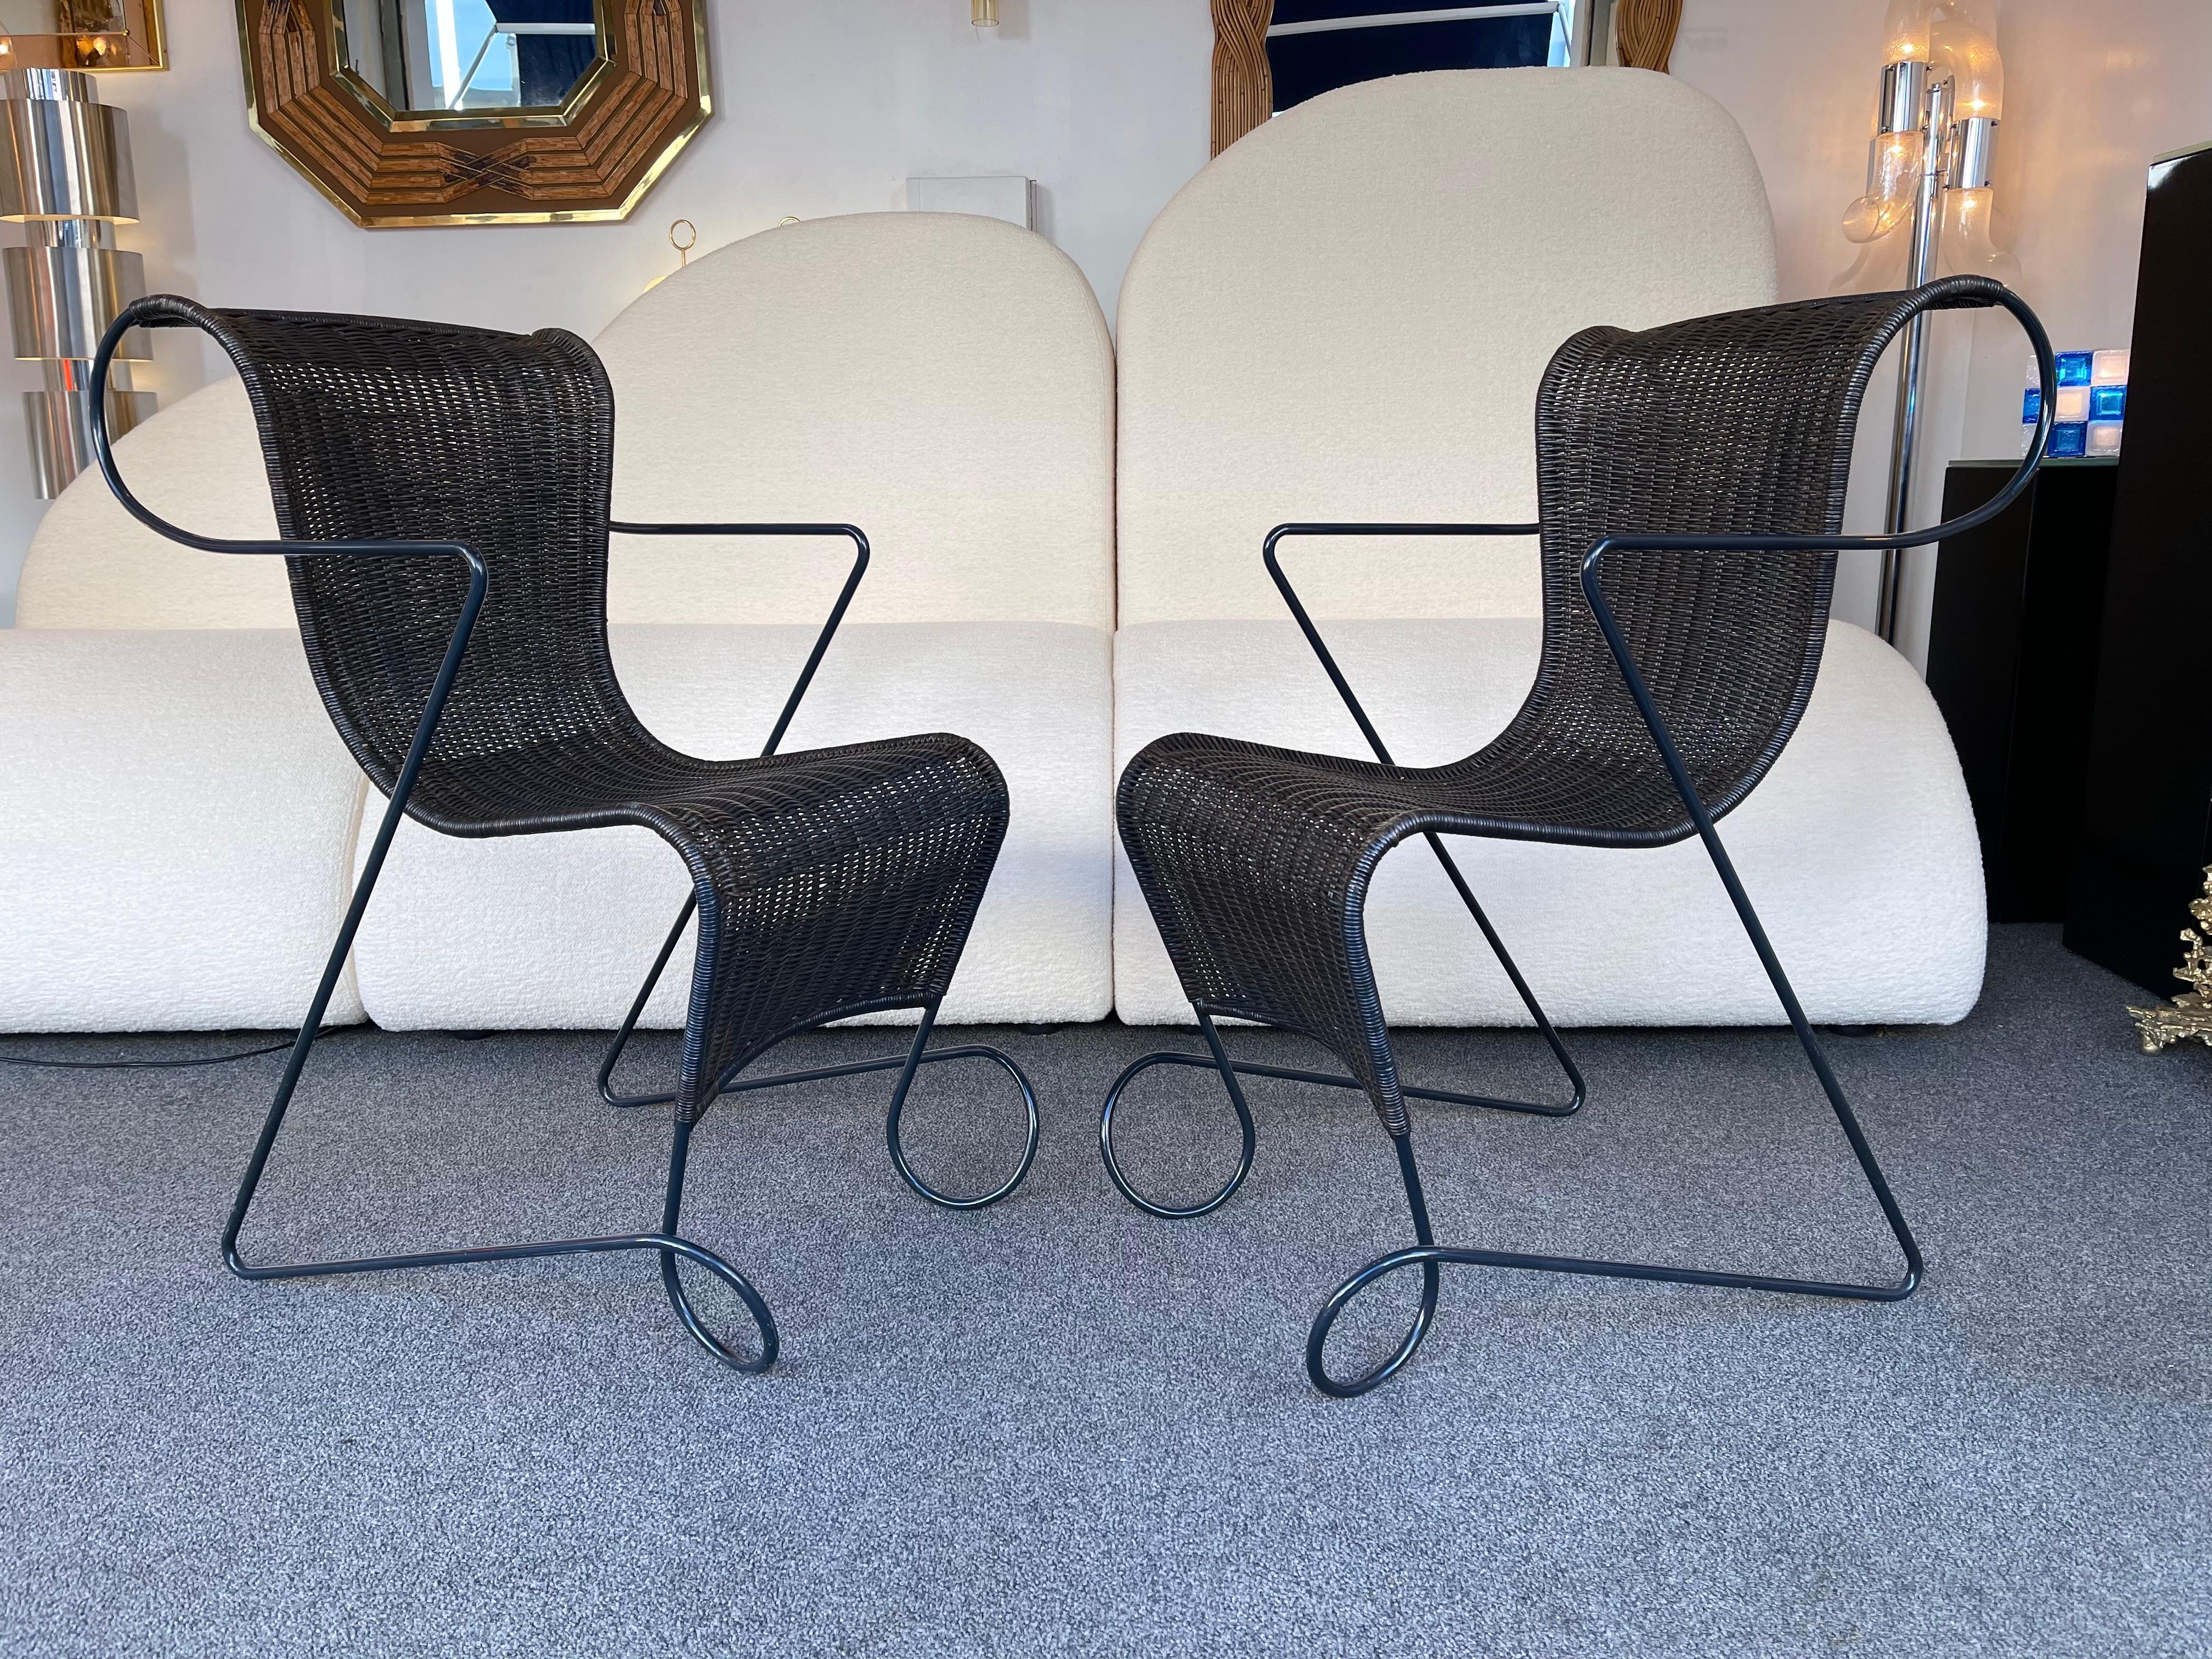 Set of 4 Chairs Zigo Metal Rattan by Ron Arad for Driade, Italy, 1990s For Sale 1